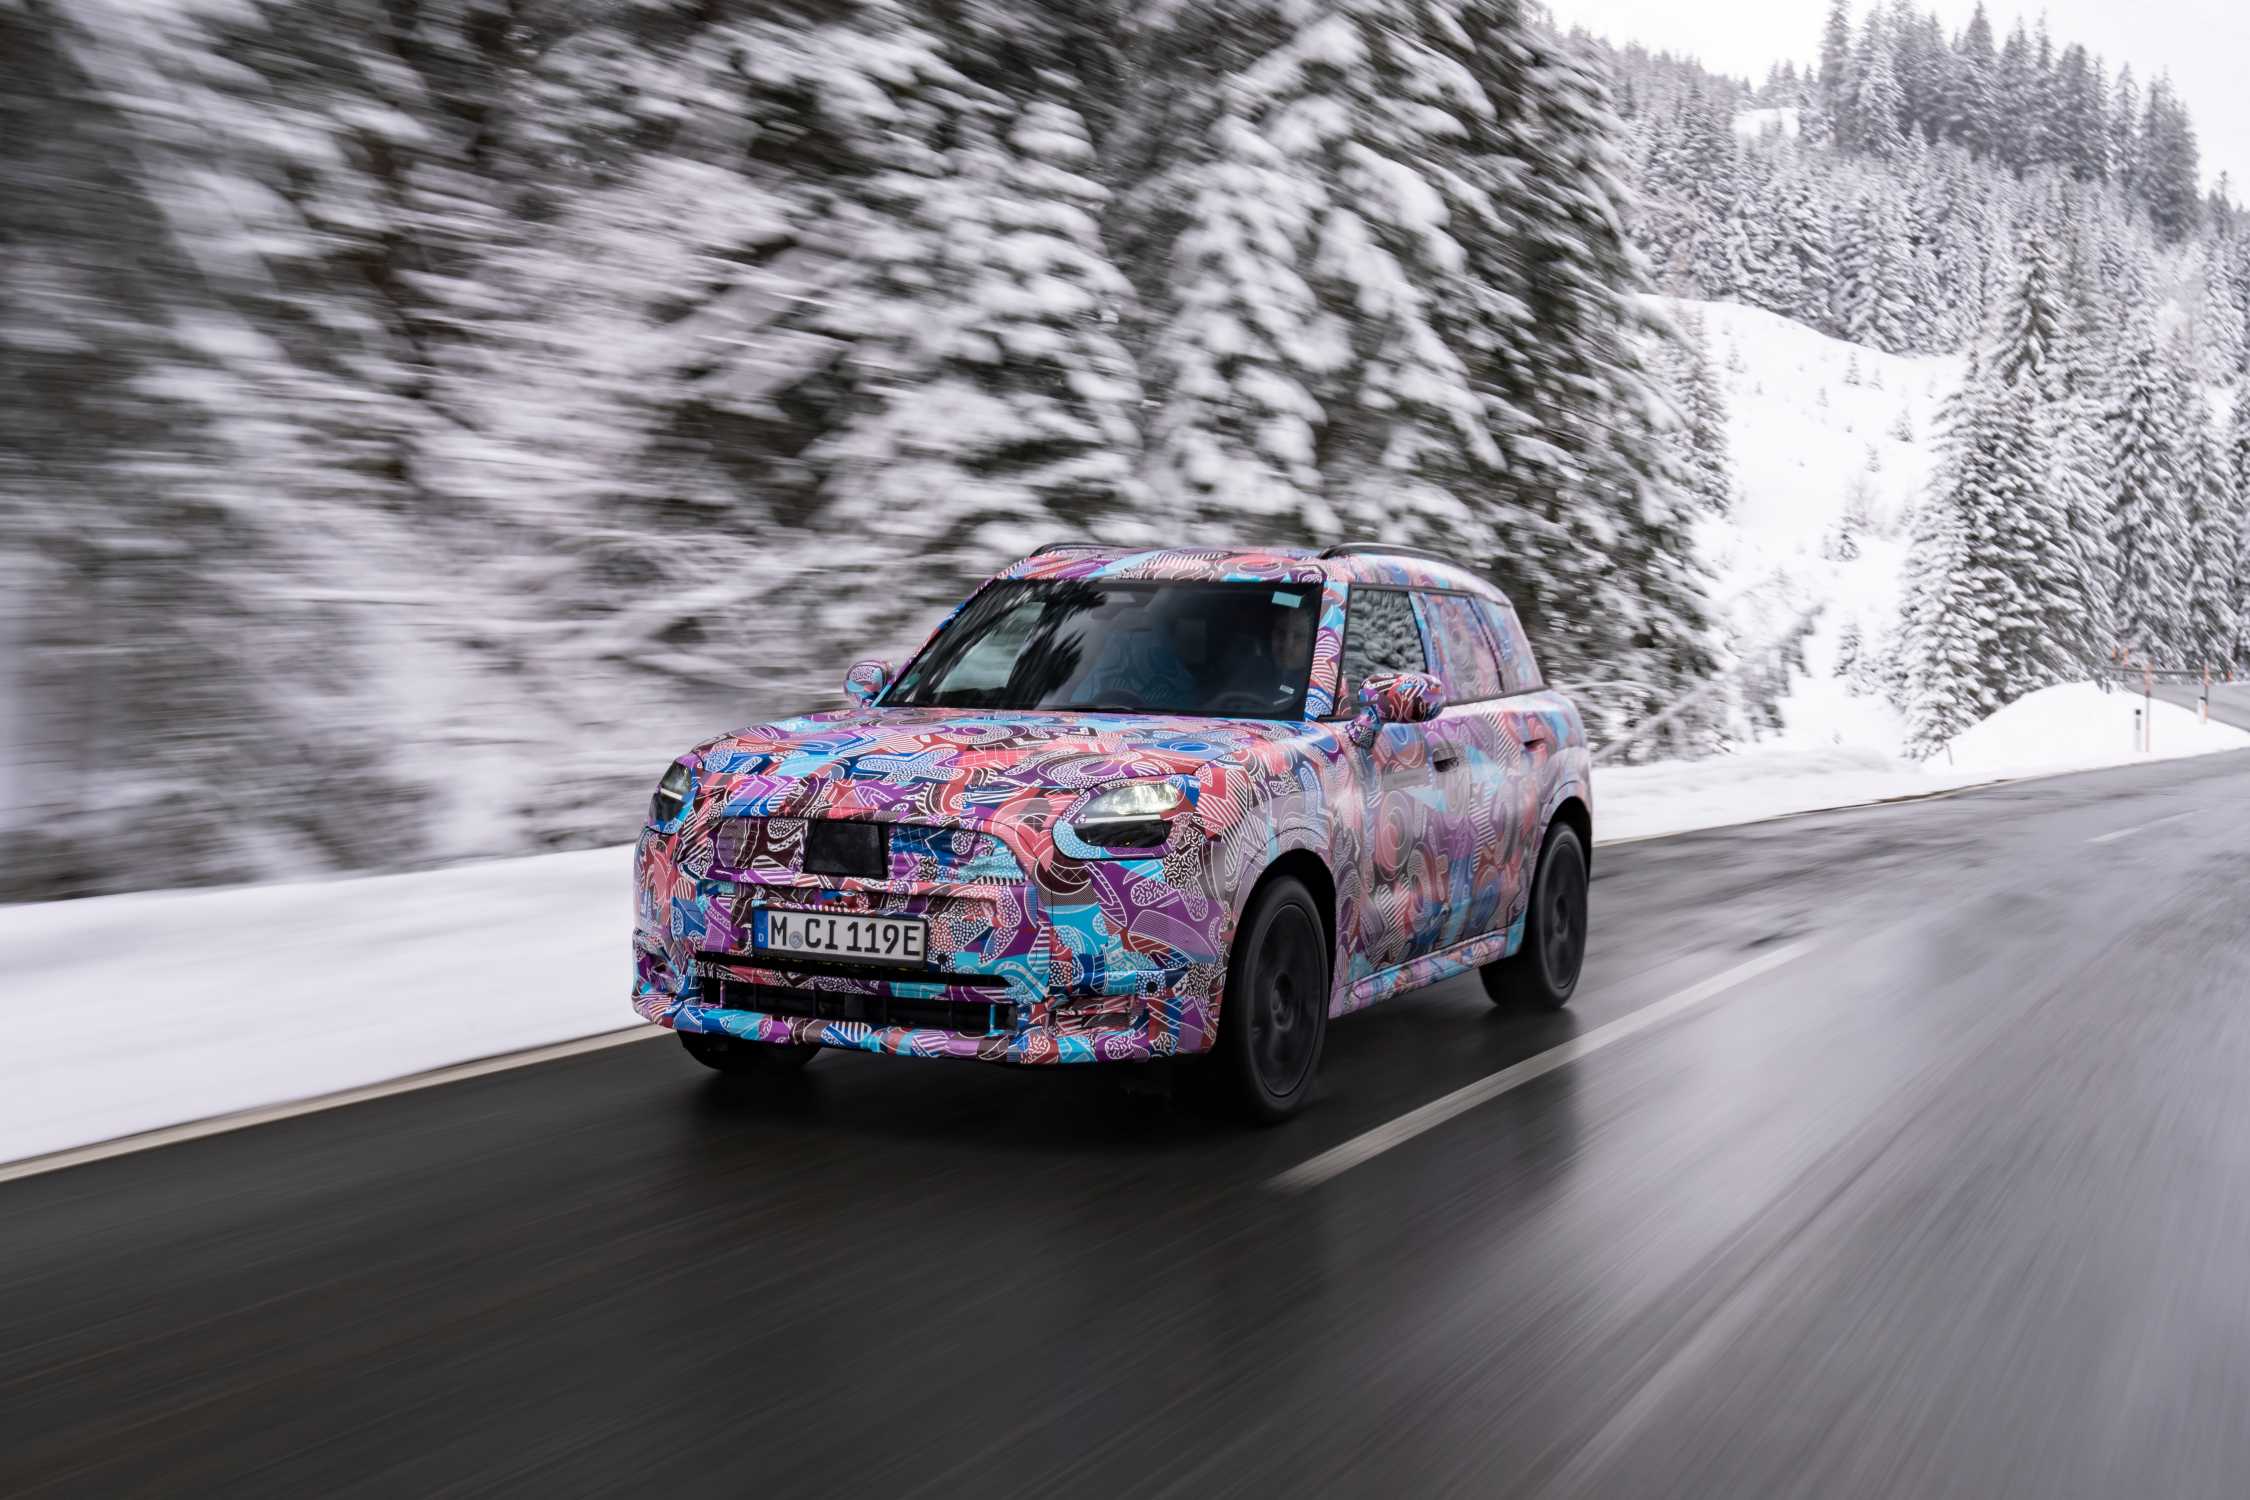 Fully electric and made in Germany: The next generation MINI Countryman.